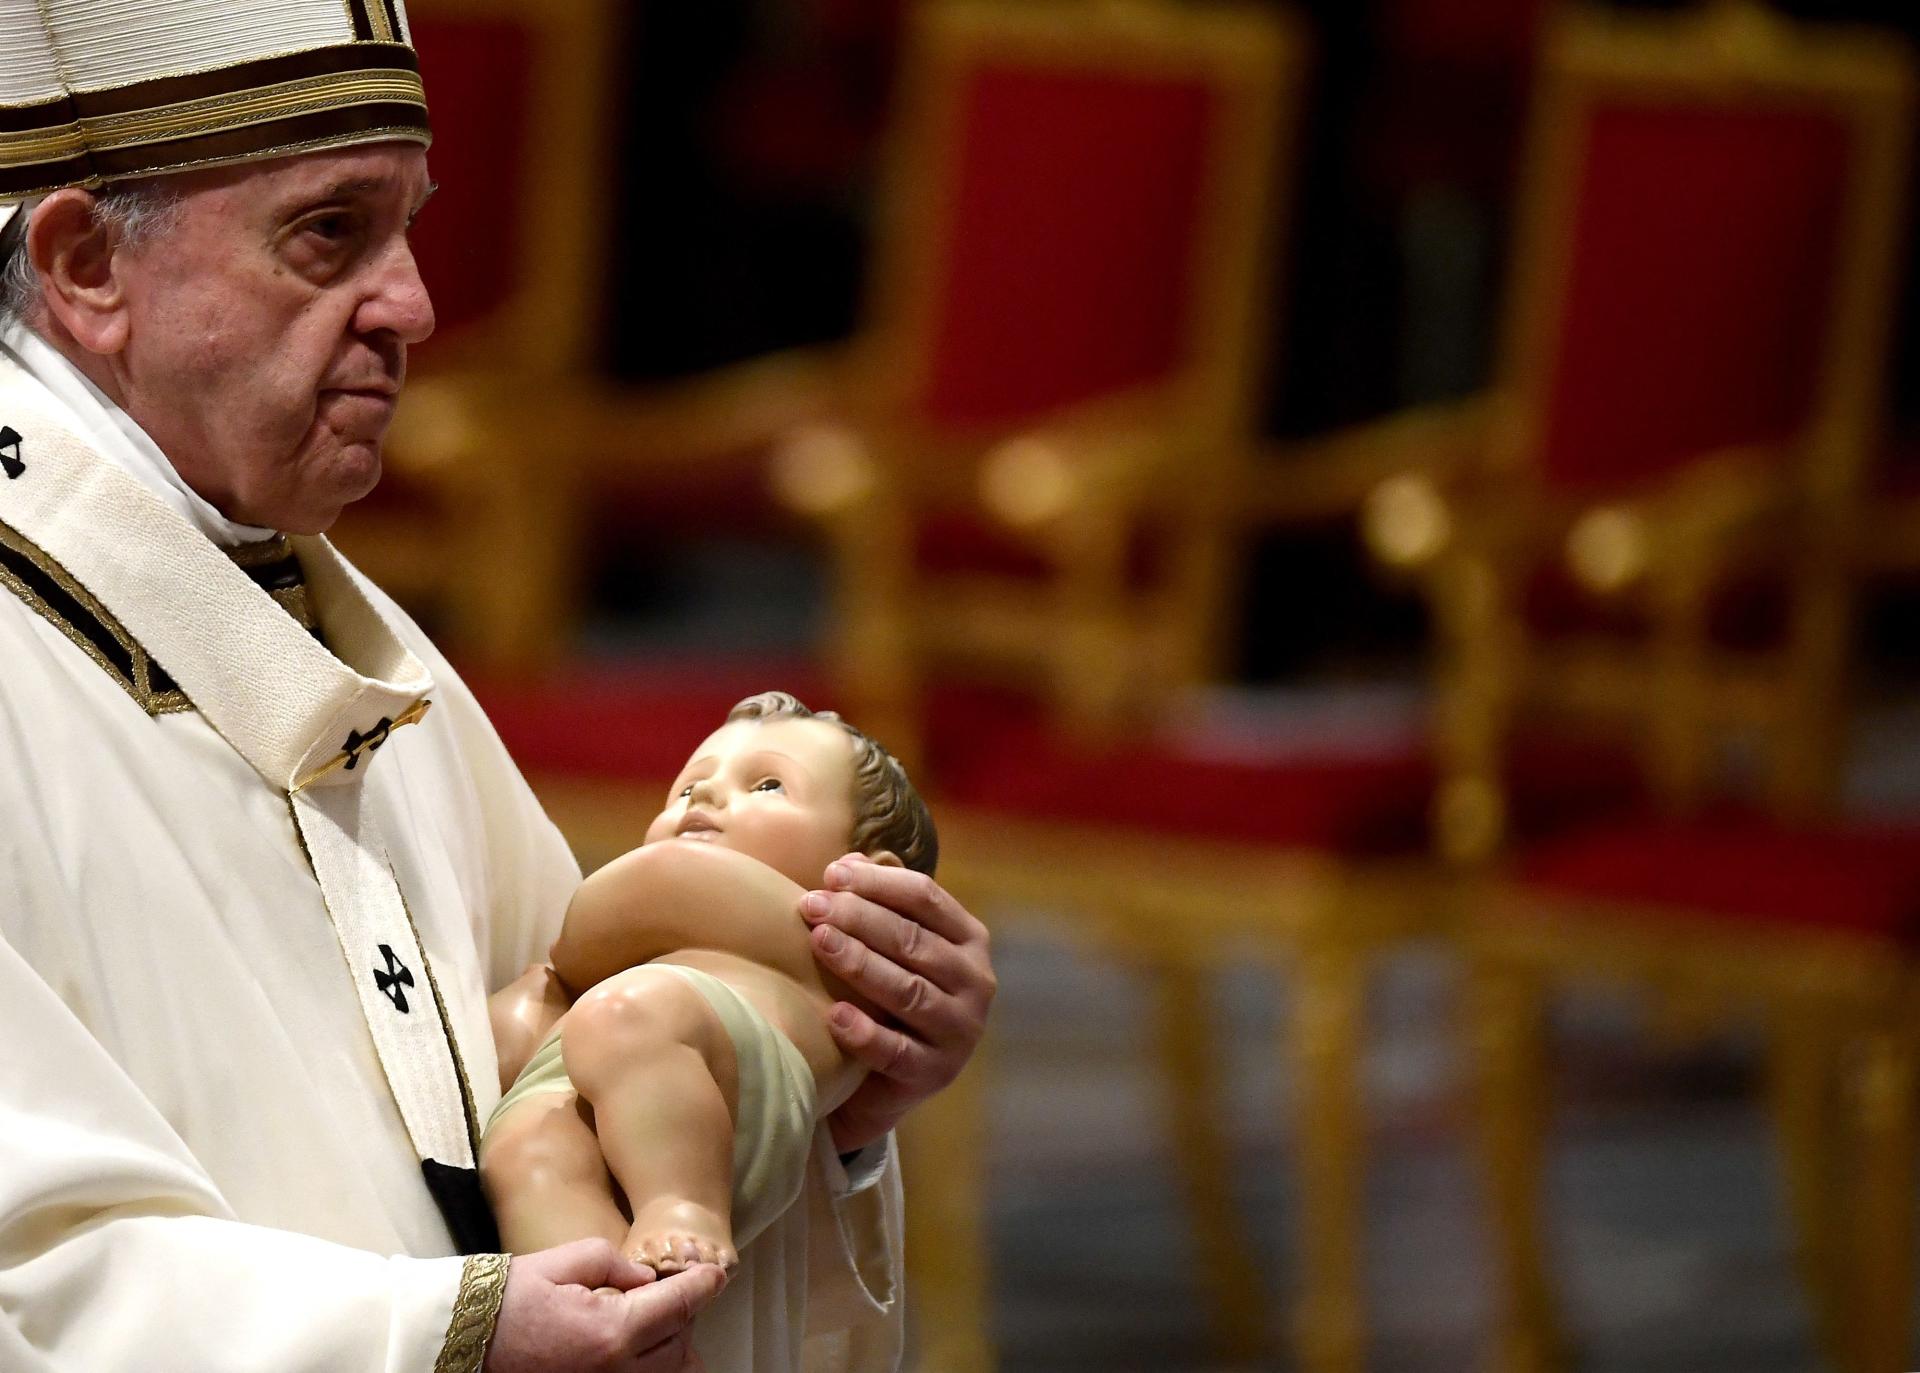 On Friday, December 24, 2021, during the New Year's Eve service in St. Peter's, Rome, Pope Francis held a portrait of the infant Jesus in his hand.